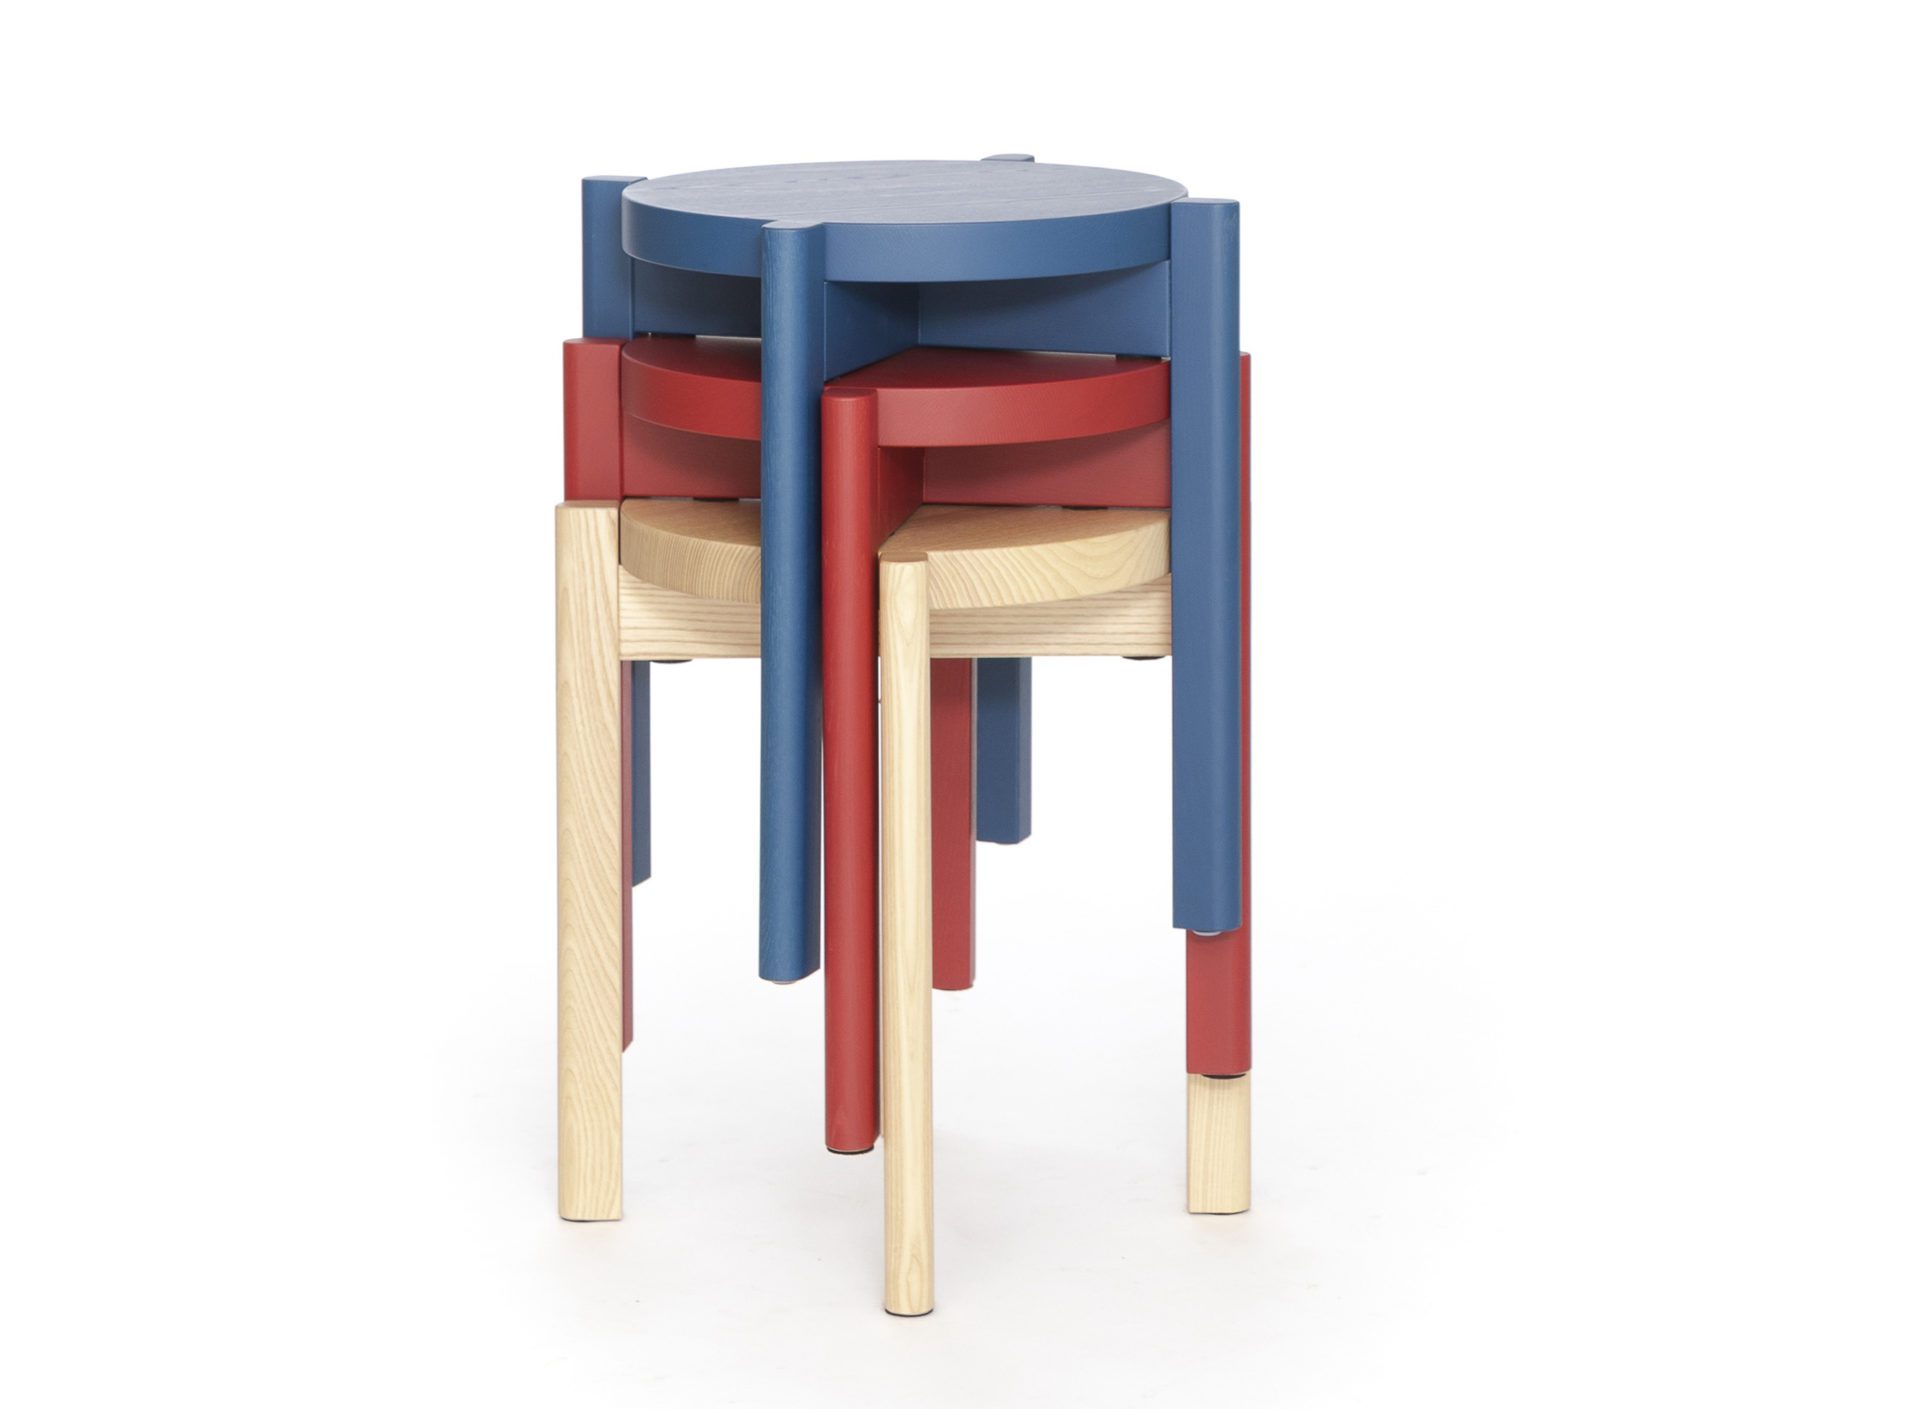 Inno coloured timber stools stacked